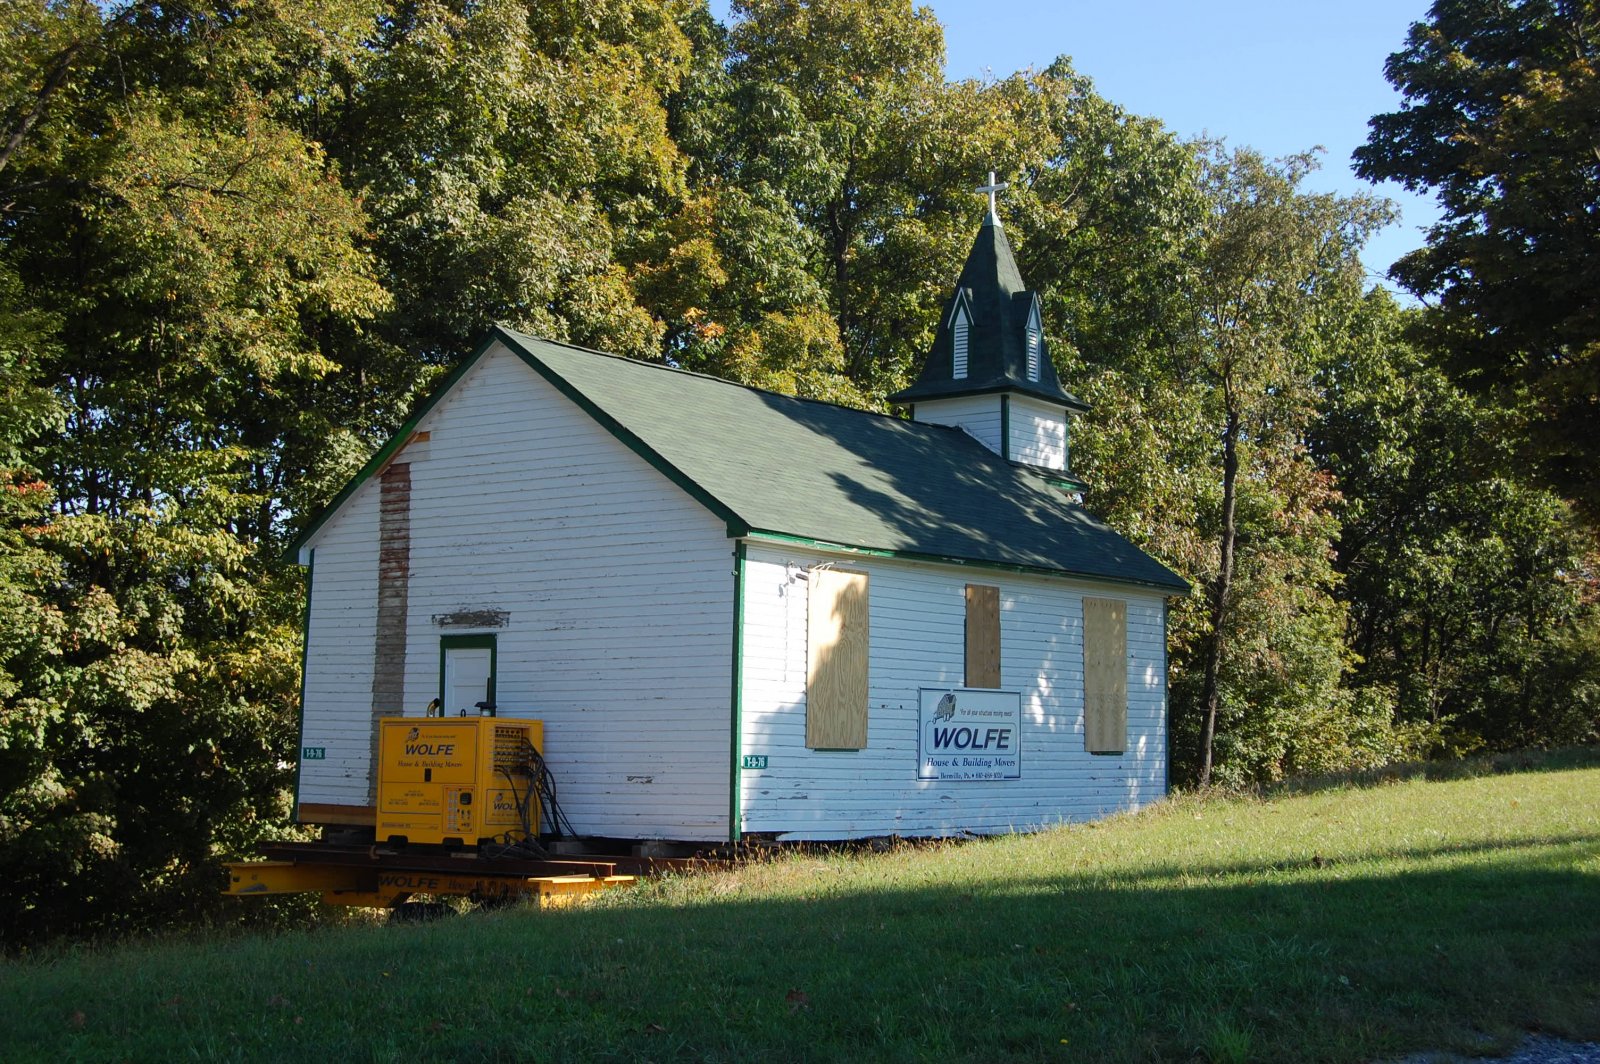 Ft. Indiantown Gap Chapel Lifted